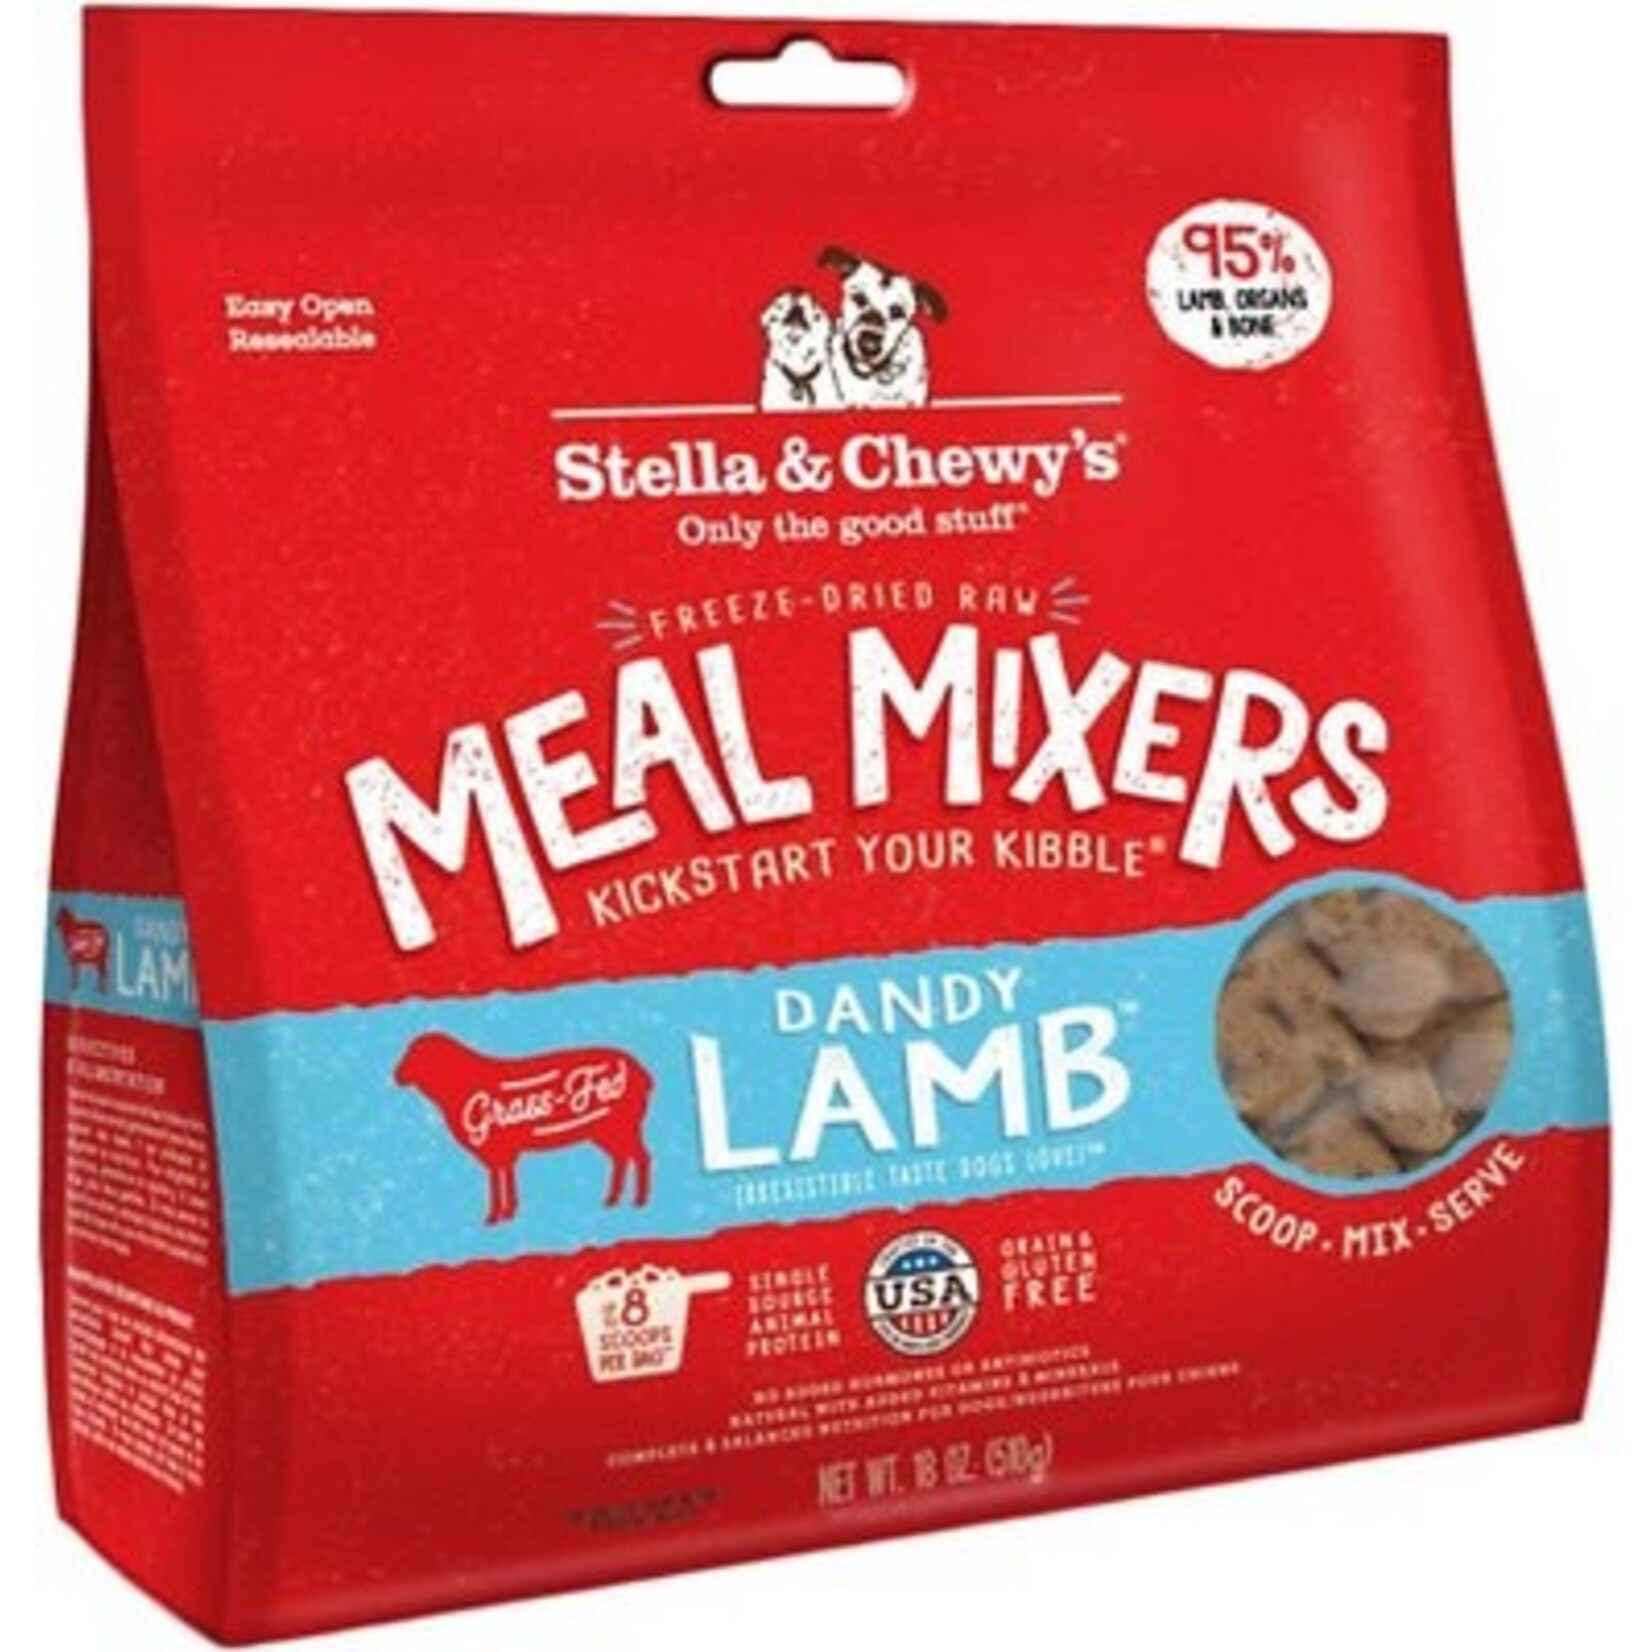 Stella & Chewy's Dandy Lamb - Freeze-Dried Meal Mixer - Stella & Chewy's